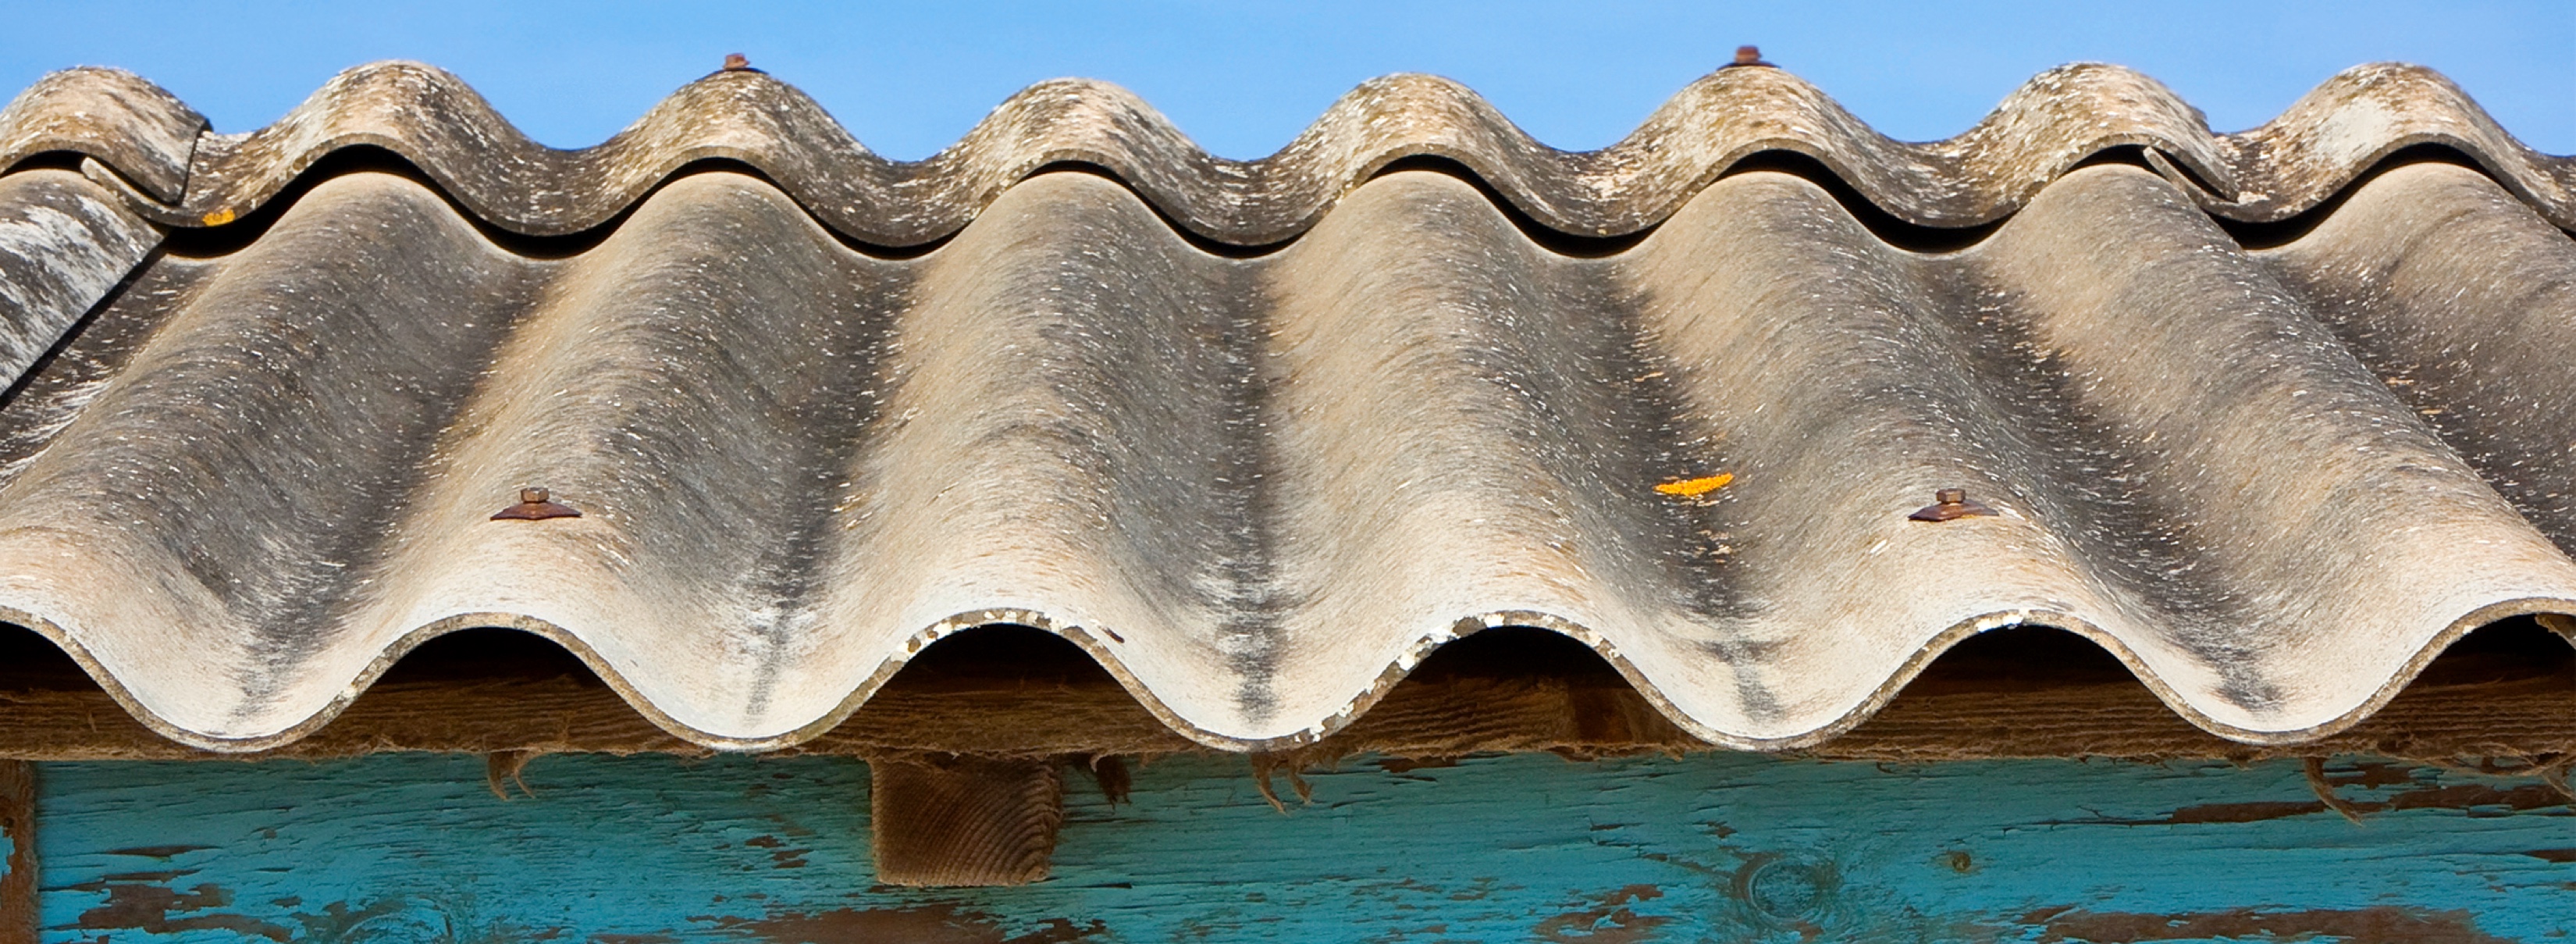 an image of roof tiles that may contain asbestos